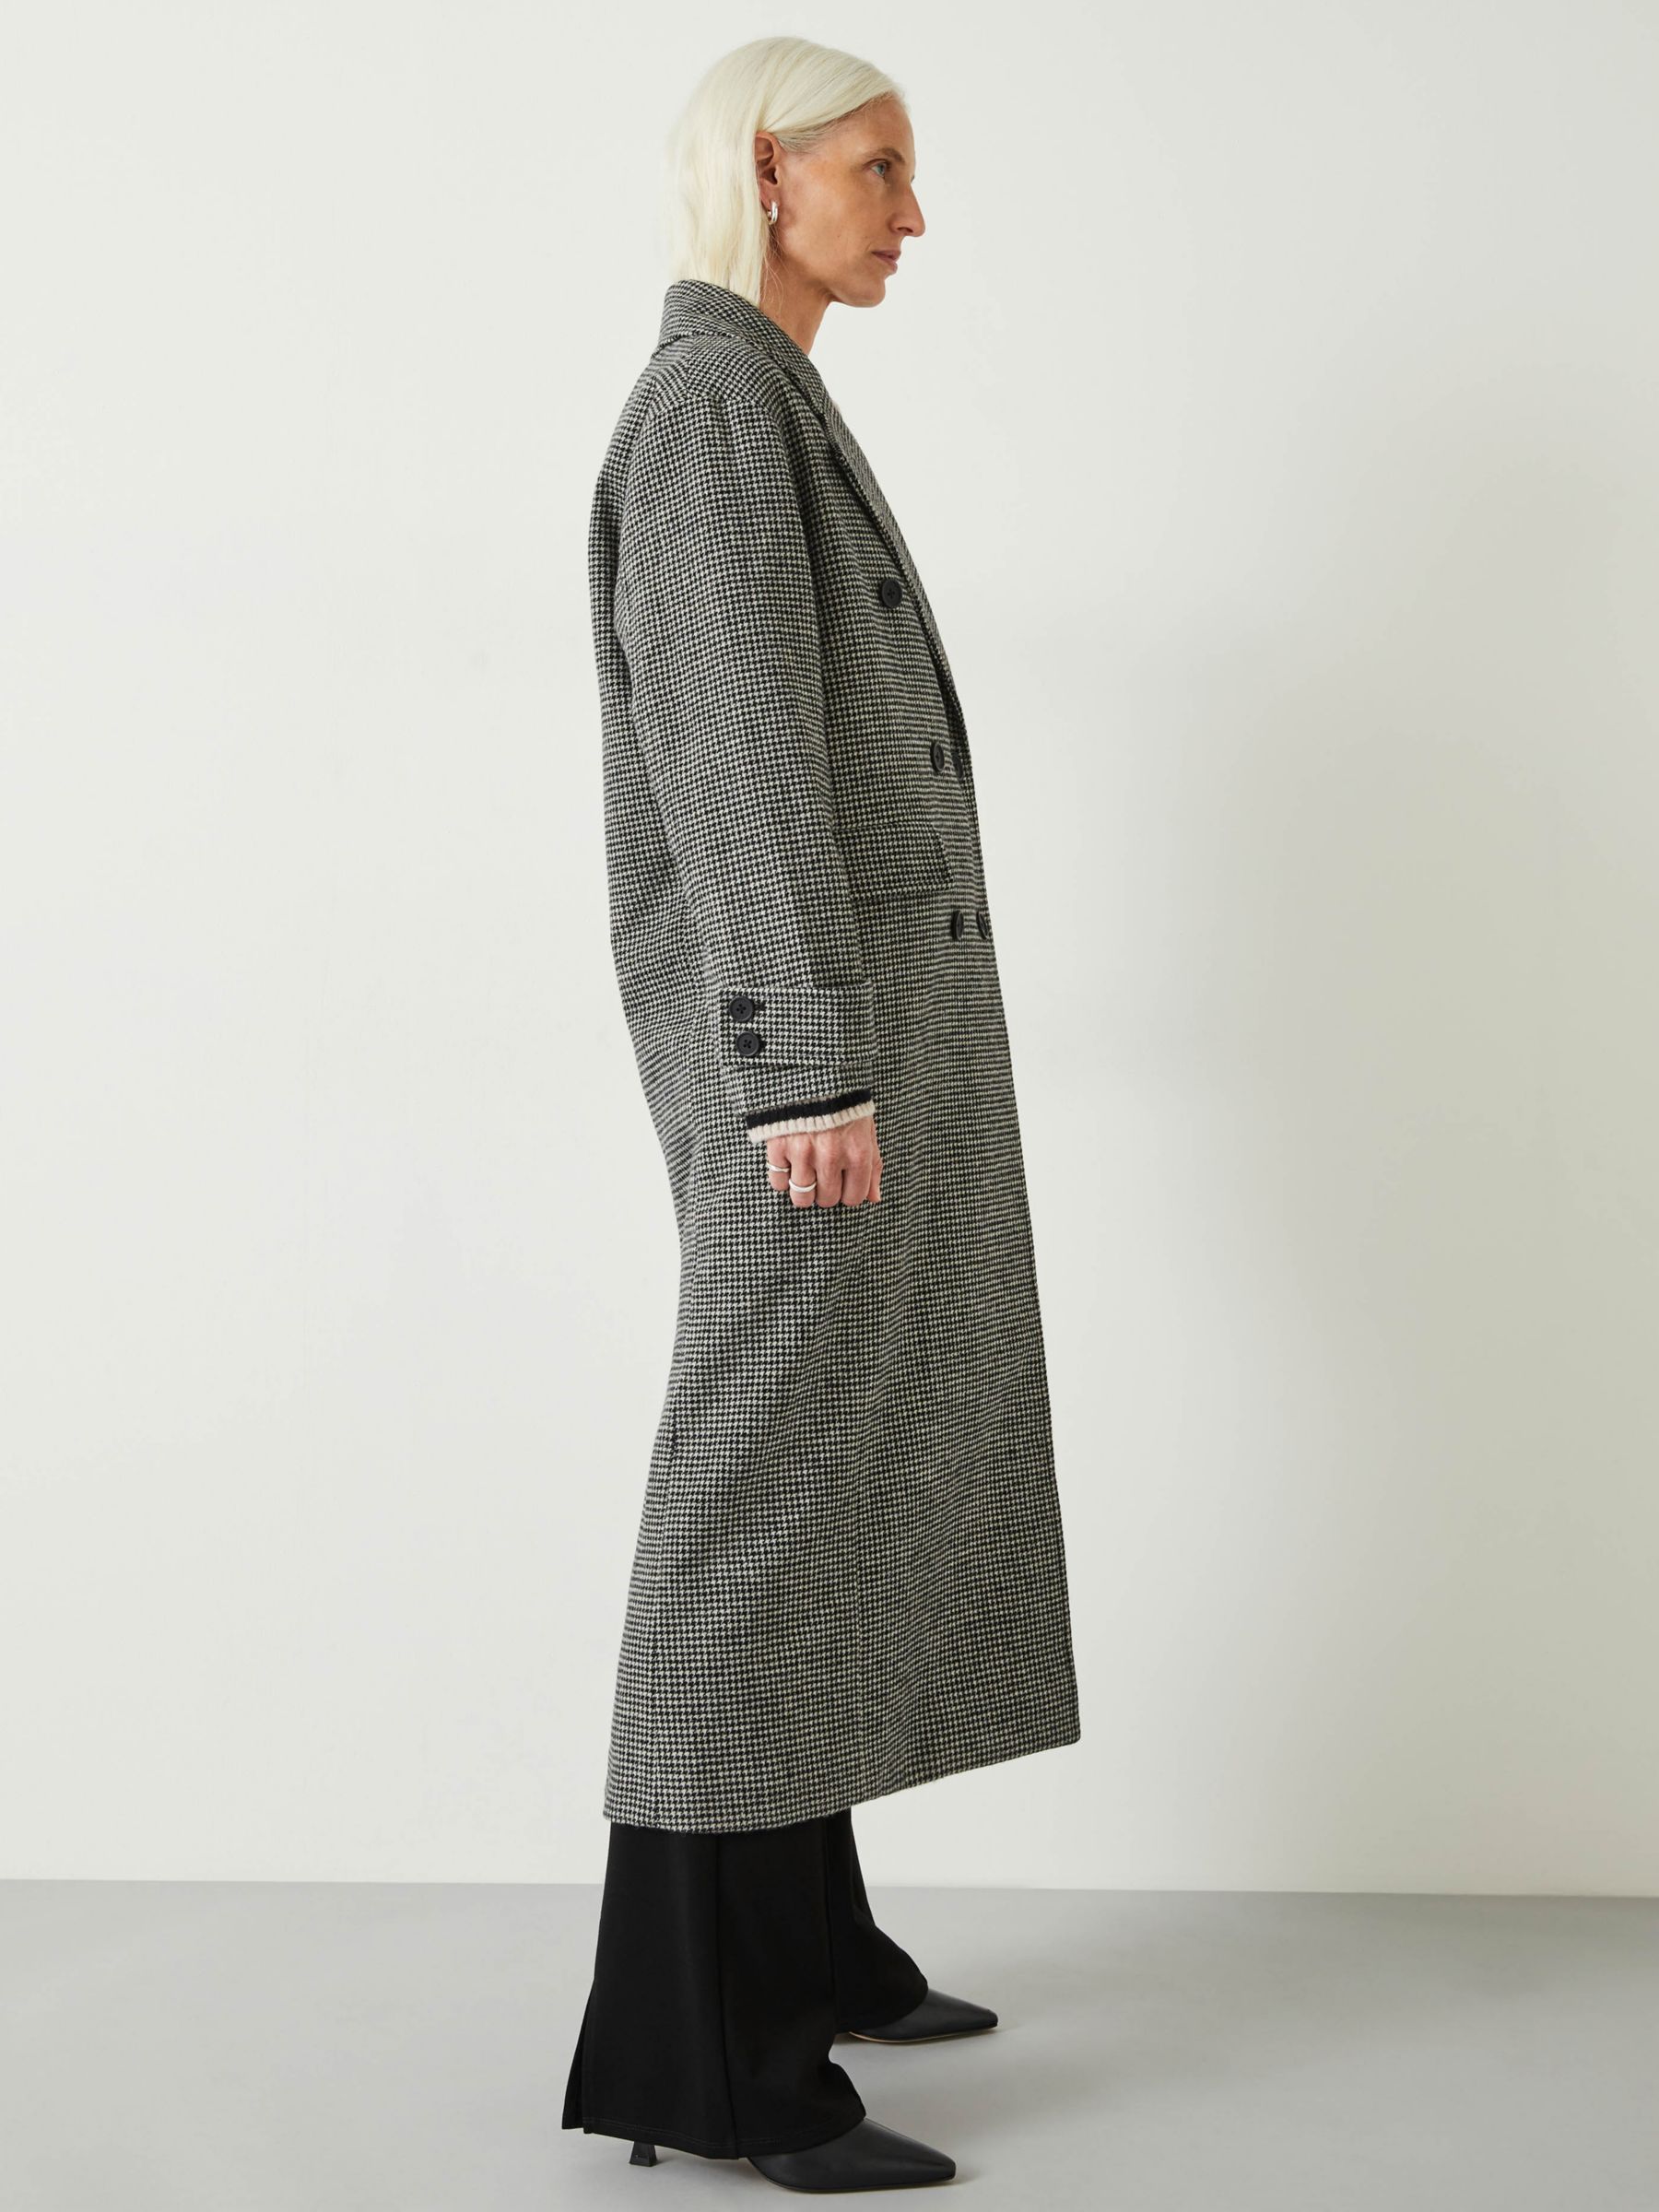 Buy HUSH Rose Double Breasted Houndstooth Coat, Black/White Online at johnlewis.com